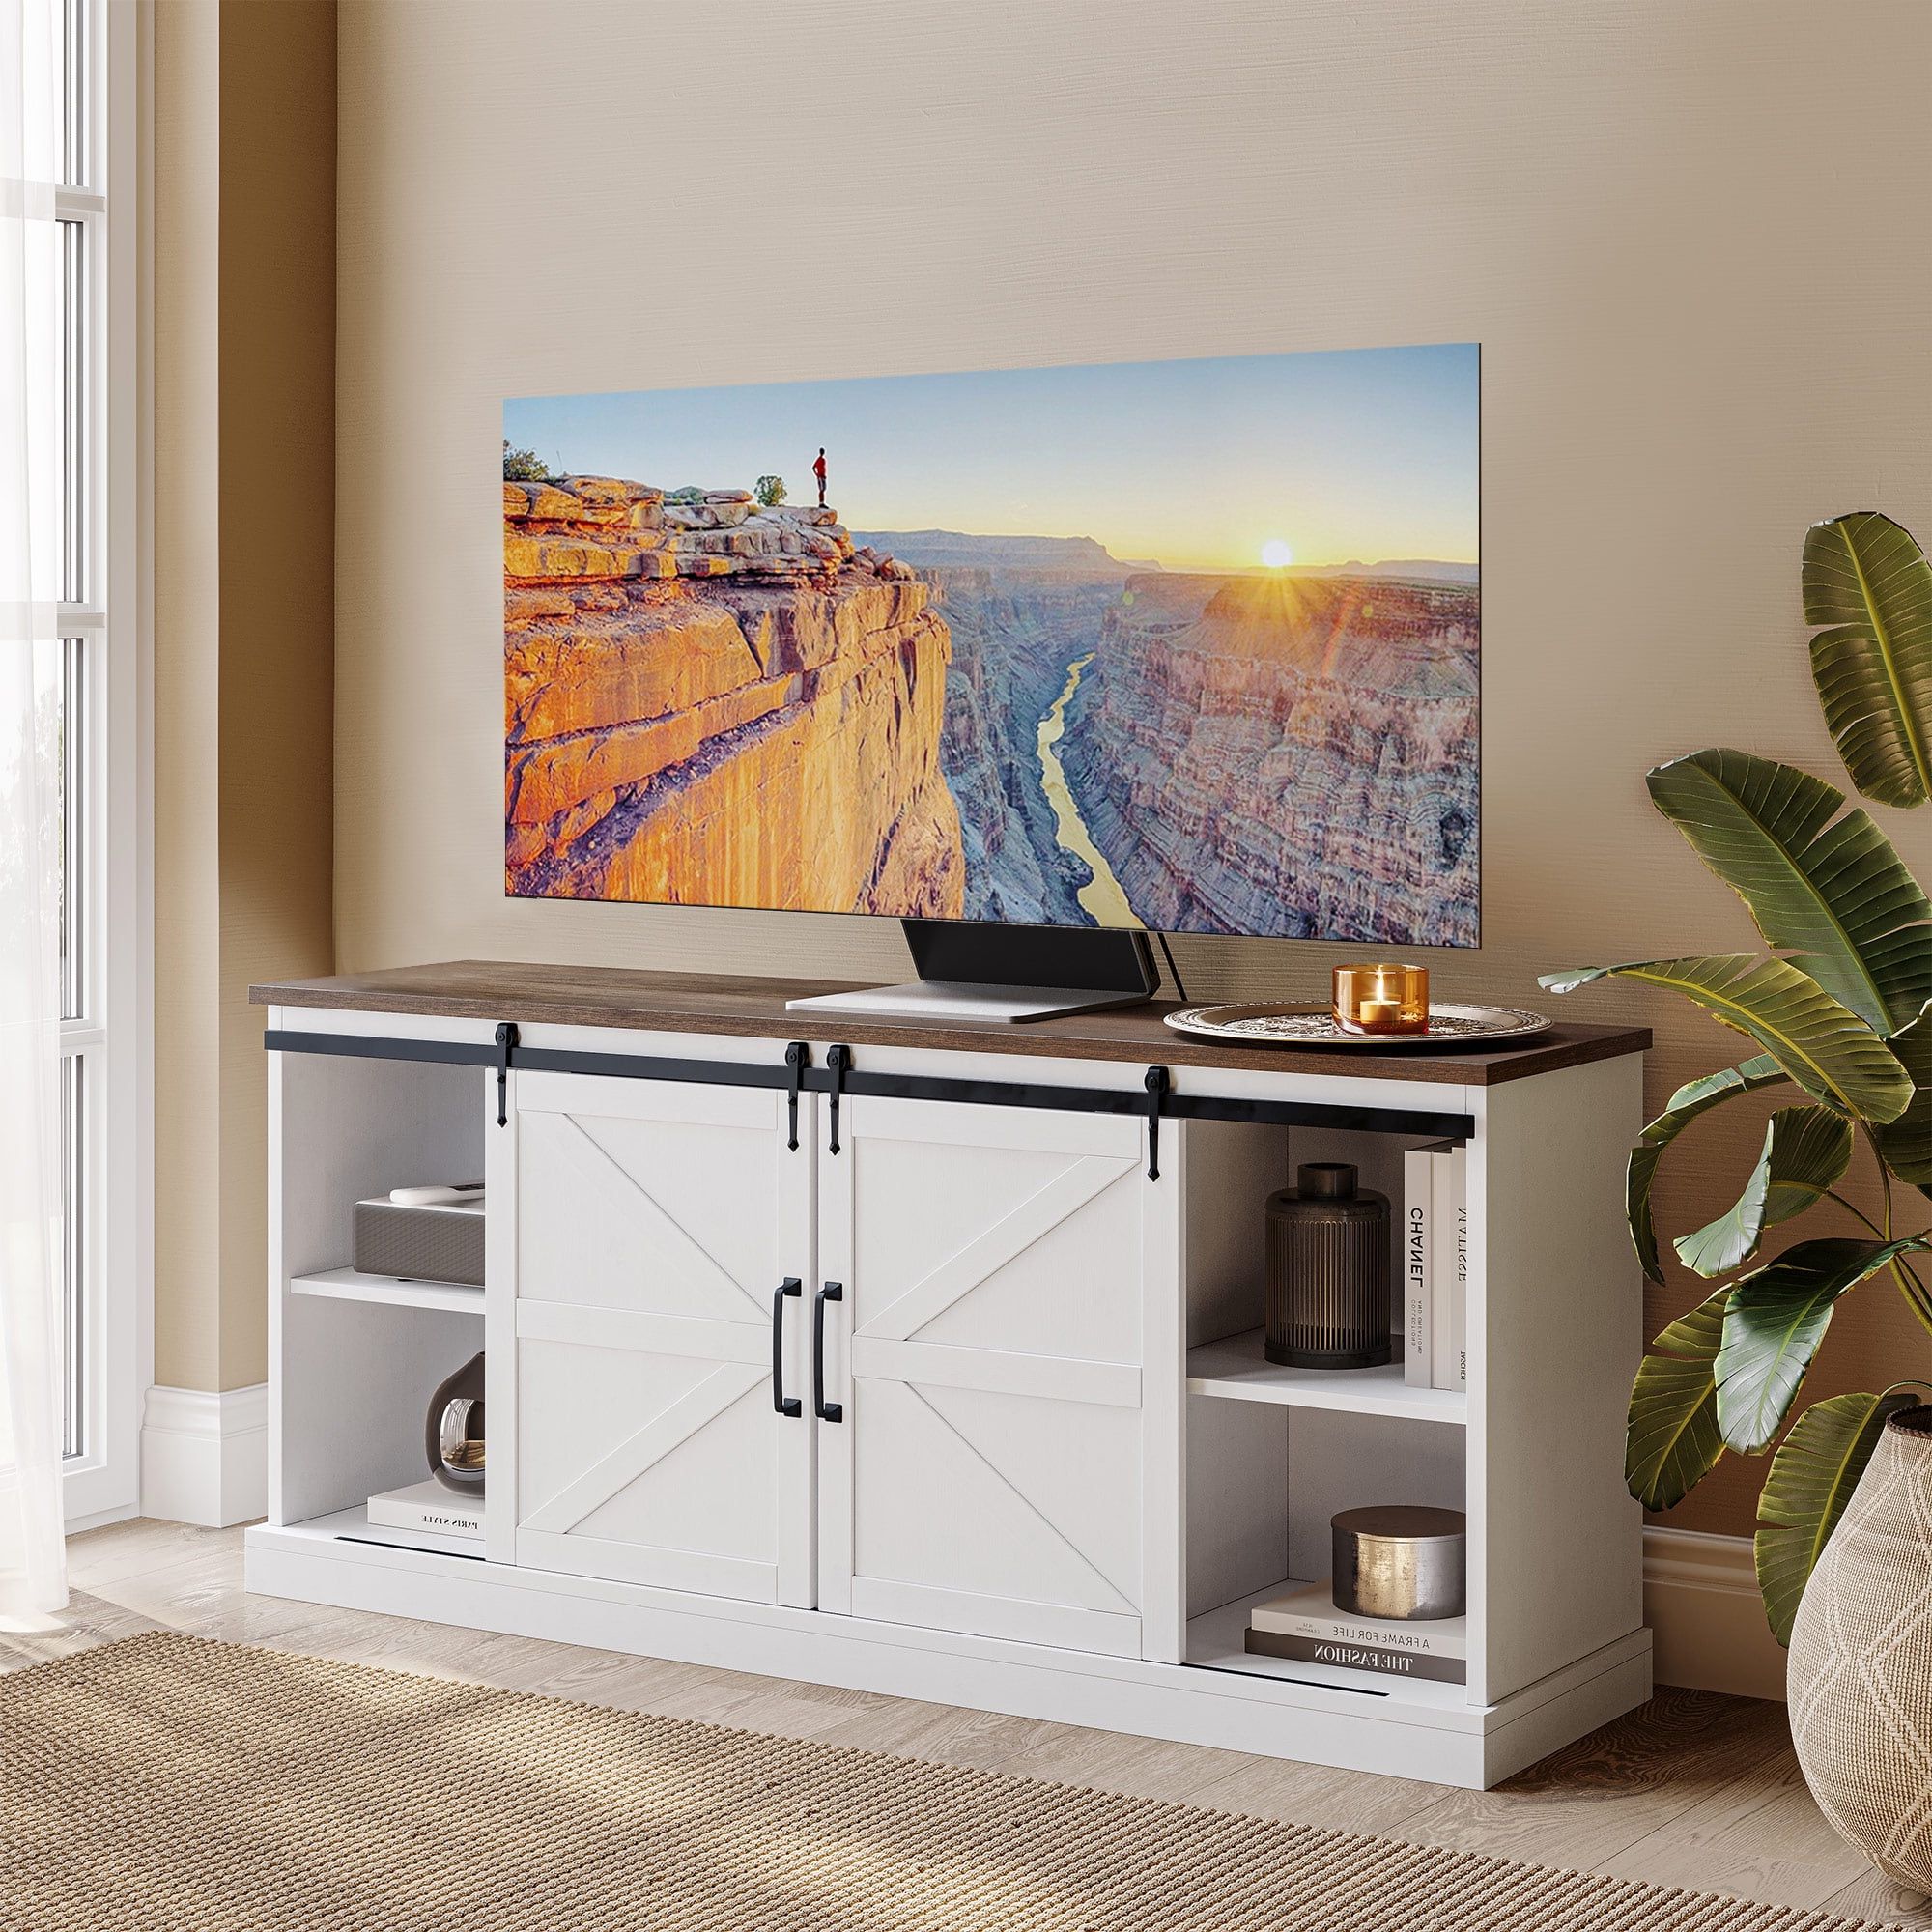 Belleze 58" Tv Stand For Tvs Up To 65", Sliding Barn Door Tv Stand With  Adjustable Side Shelves, Farmhouse Media Console, Rustic Wood Tv Cabinet  Home Entertainment Center With Storage – Truman (white) – Walmart With Farmhouse Media Entertainment Centers (View 16 of 20)